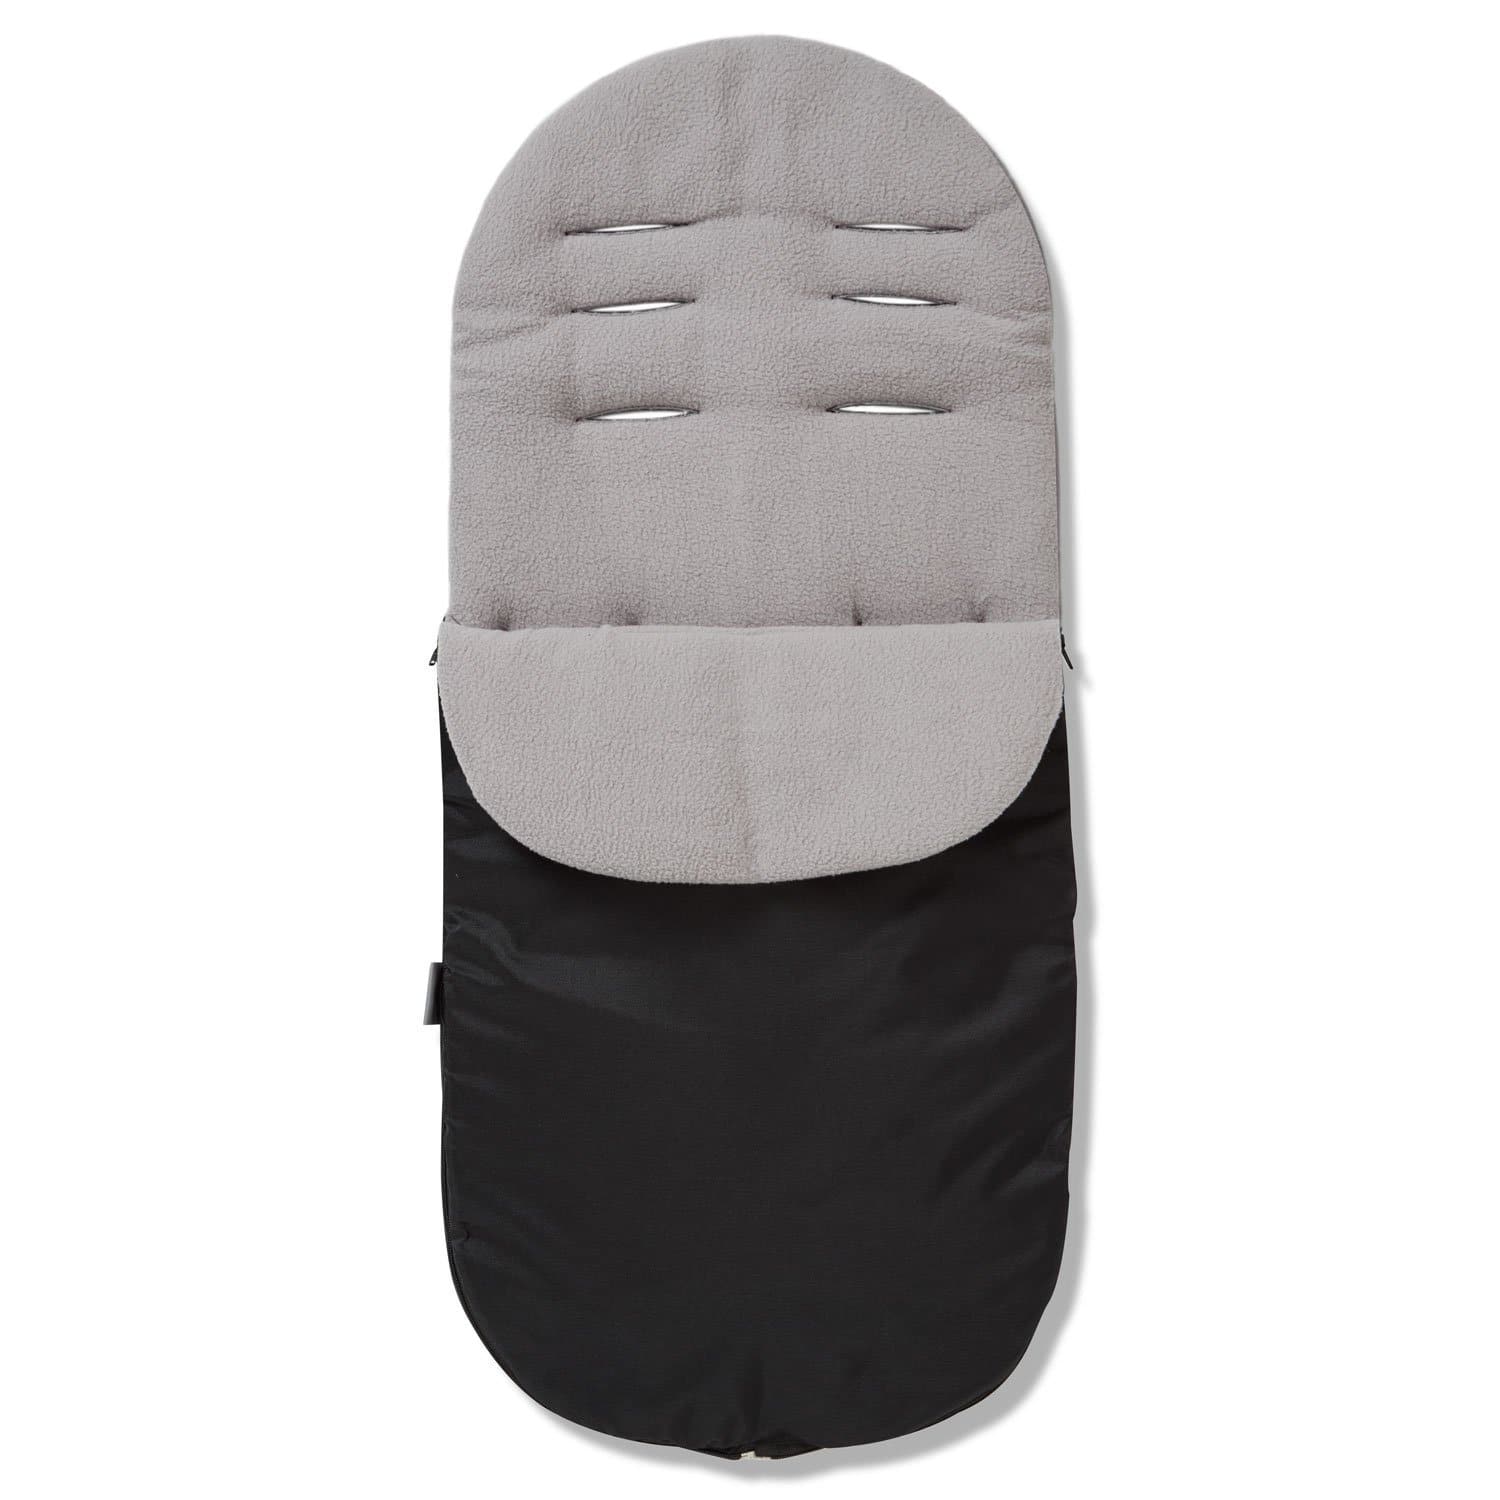 Footmuff / Cosy Toes Compatible with Noukies - Grey / Fits All Models | For Your Little One